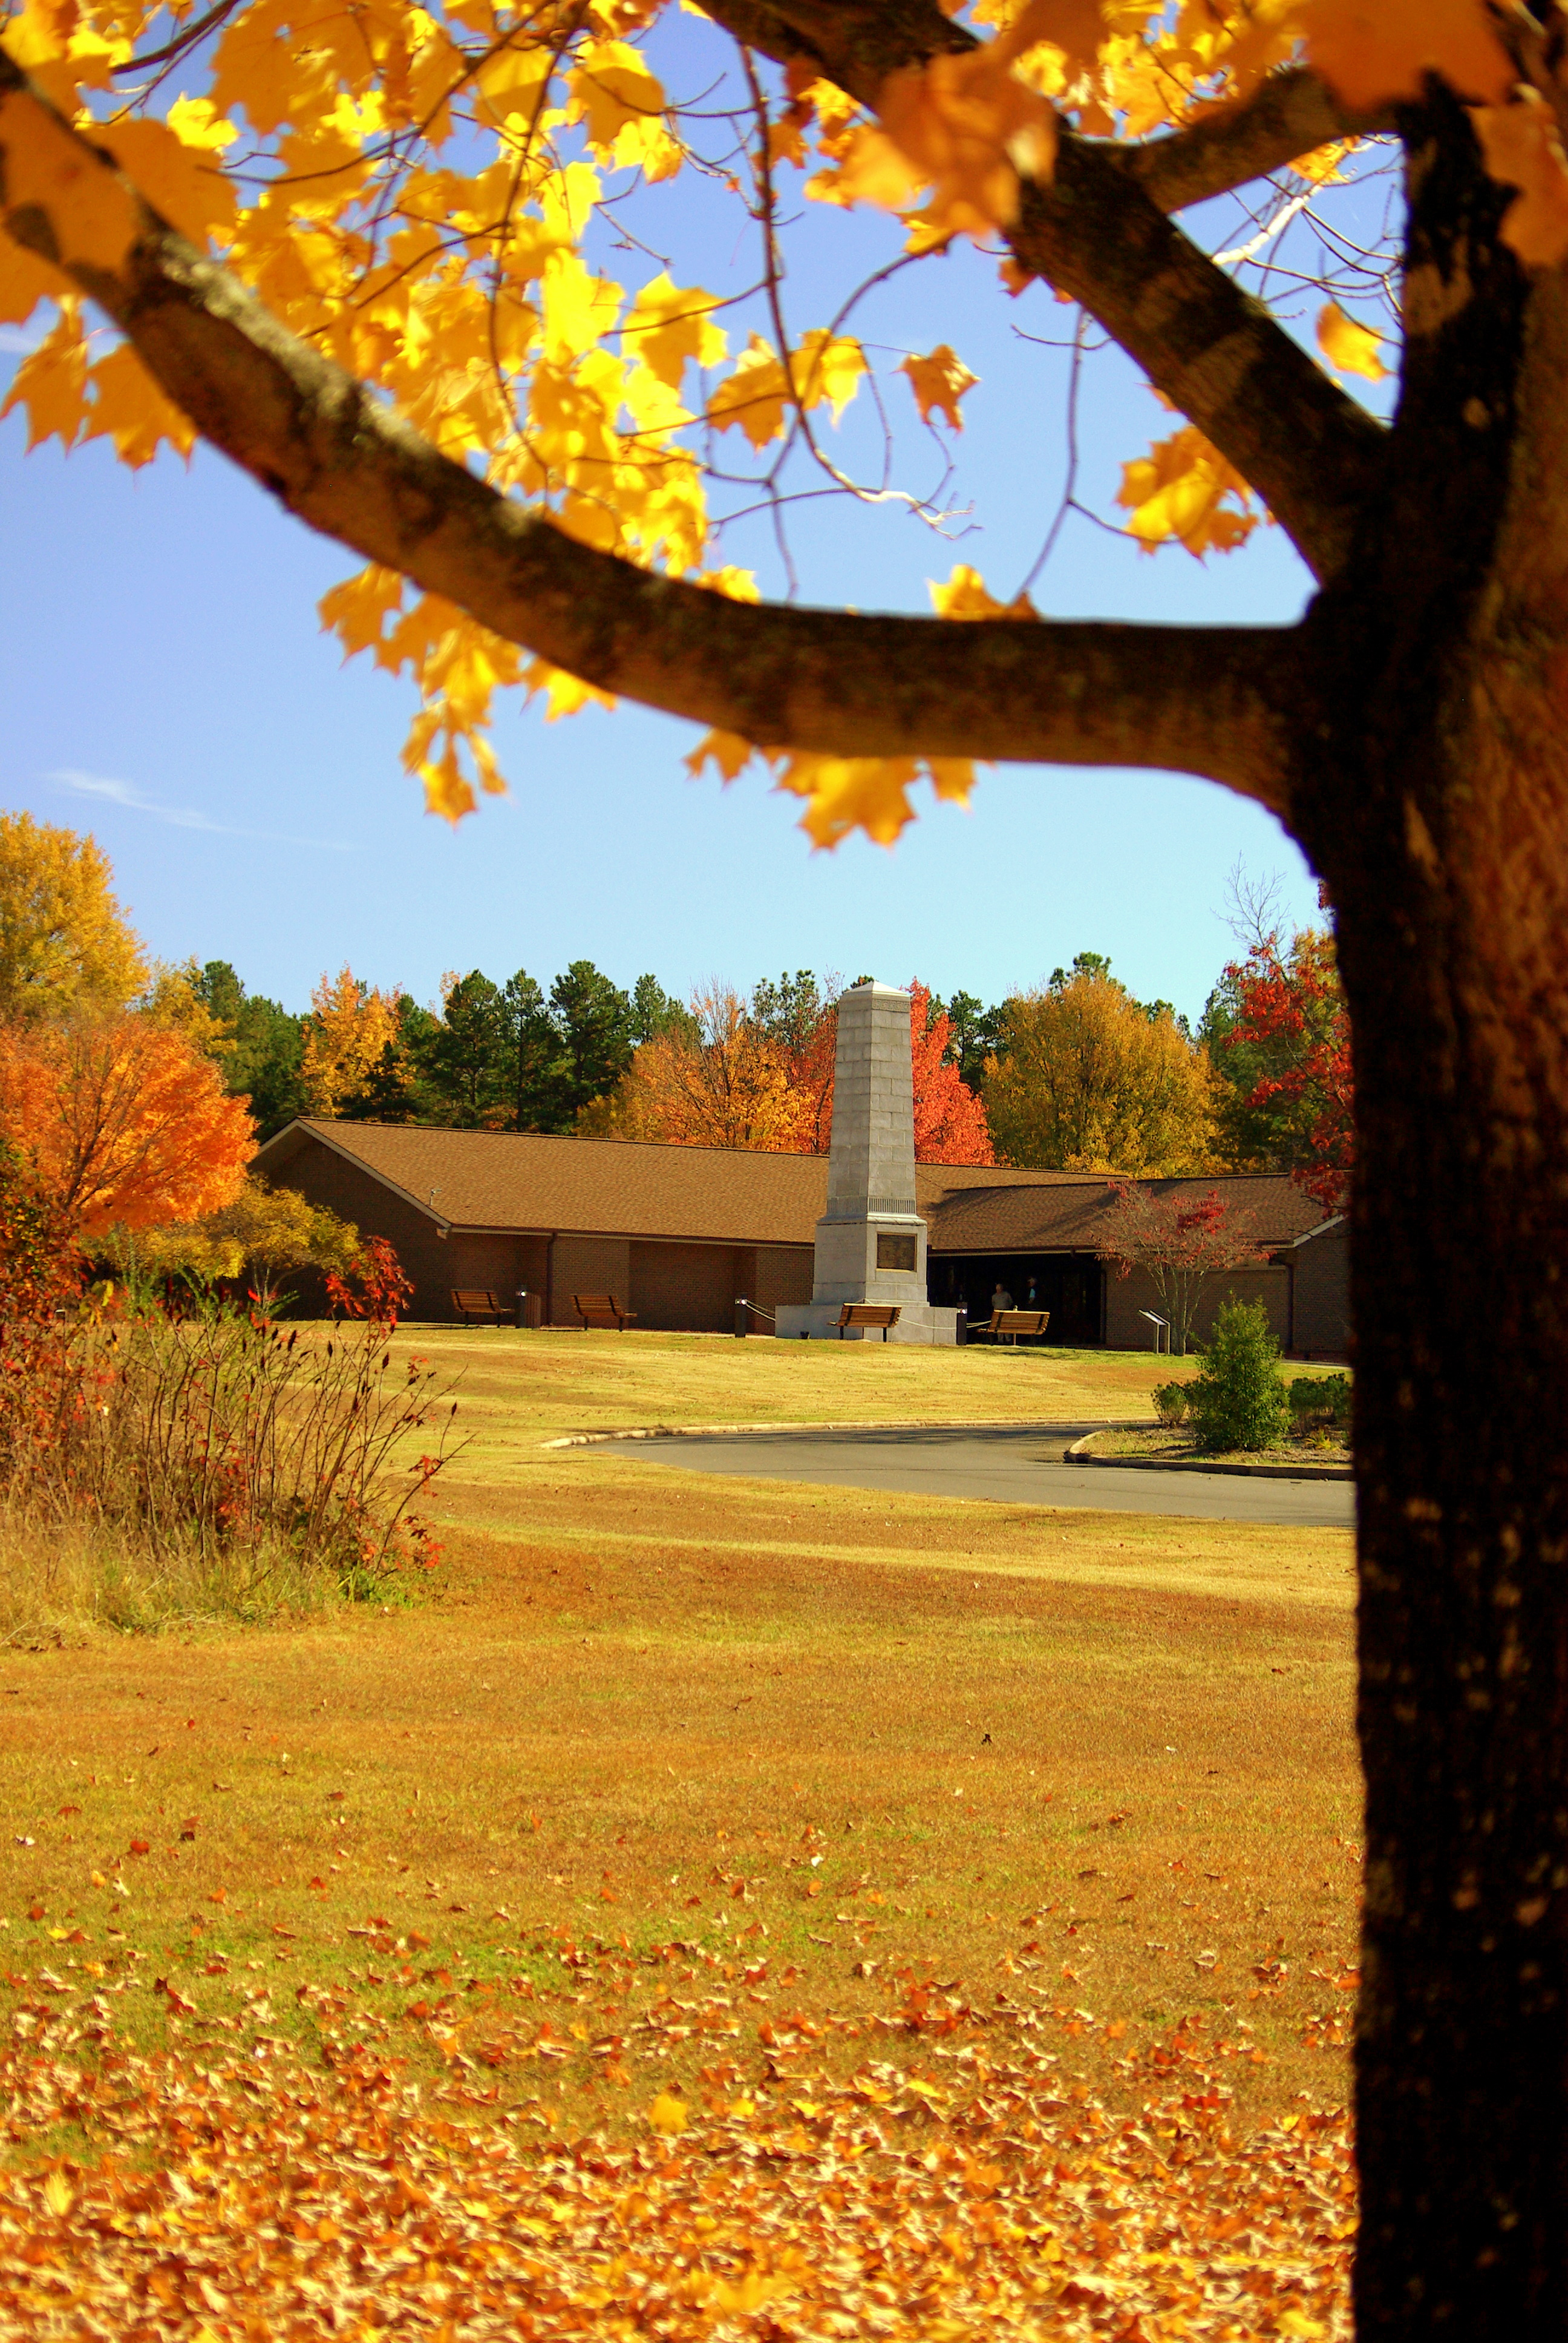 The Visitor Center and US Monument are framed by orange and yellow trees.